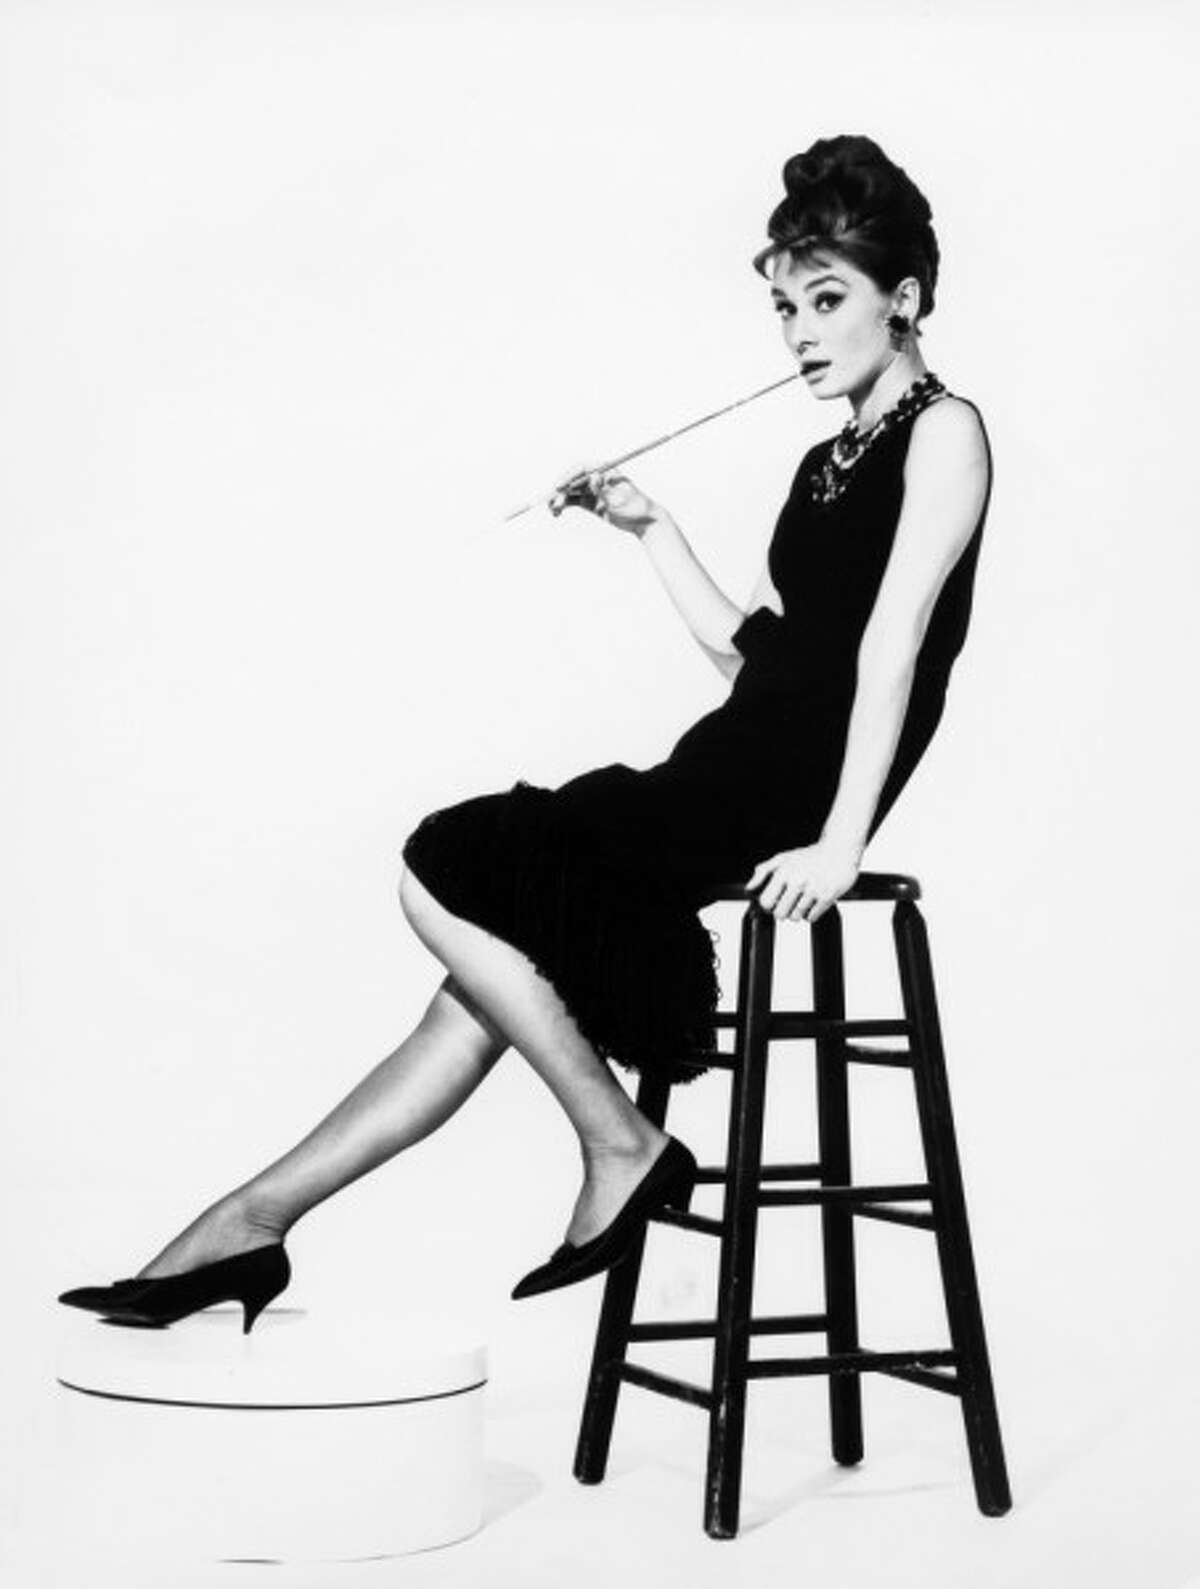 Audrey Hepburn, in the classic photo of the classic little black dress.